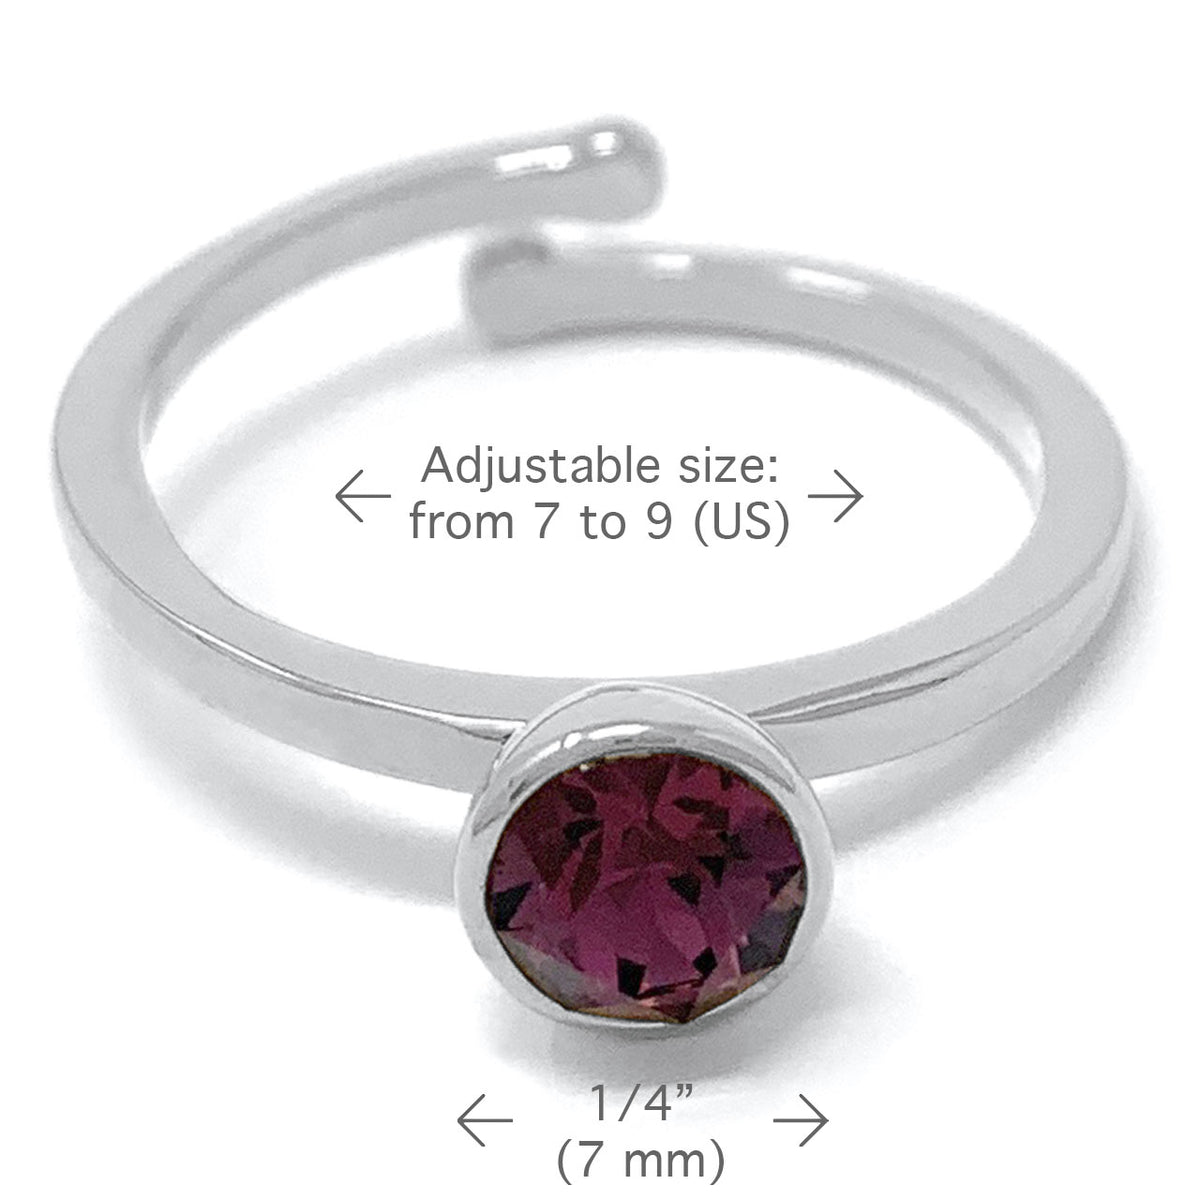 Harley Adjustable Ring with Purple Amethyst Round Crystals from Swarovski Silver Toned Rhodium Plated - Ed Heart